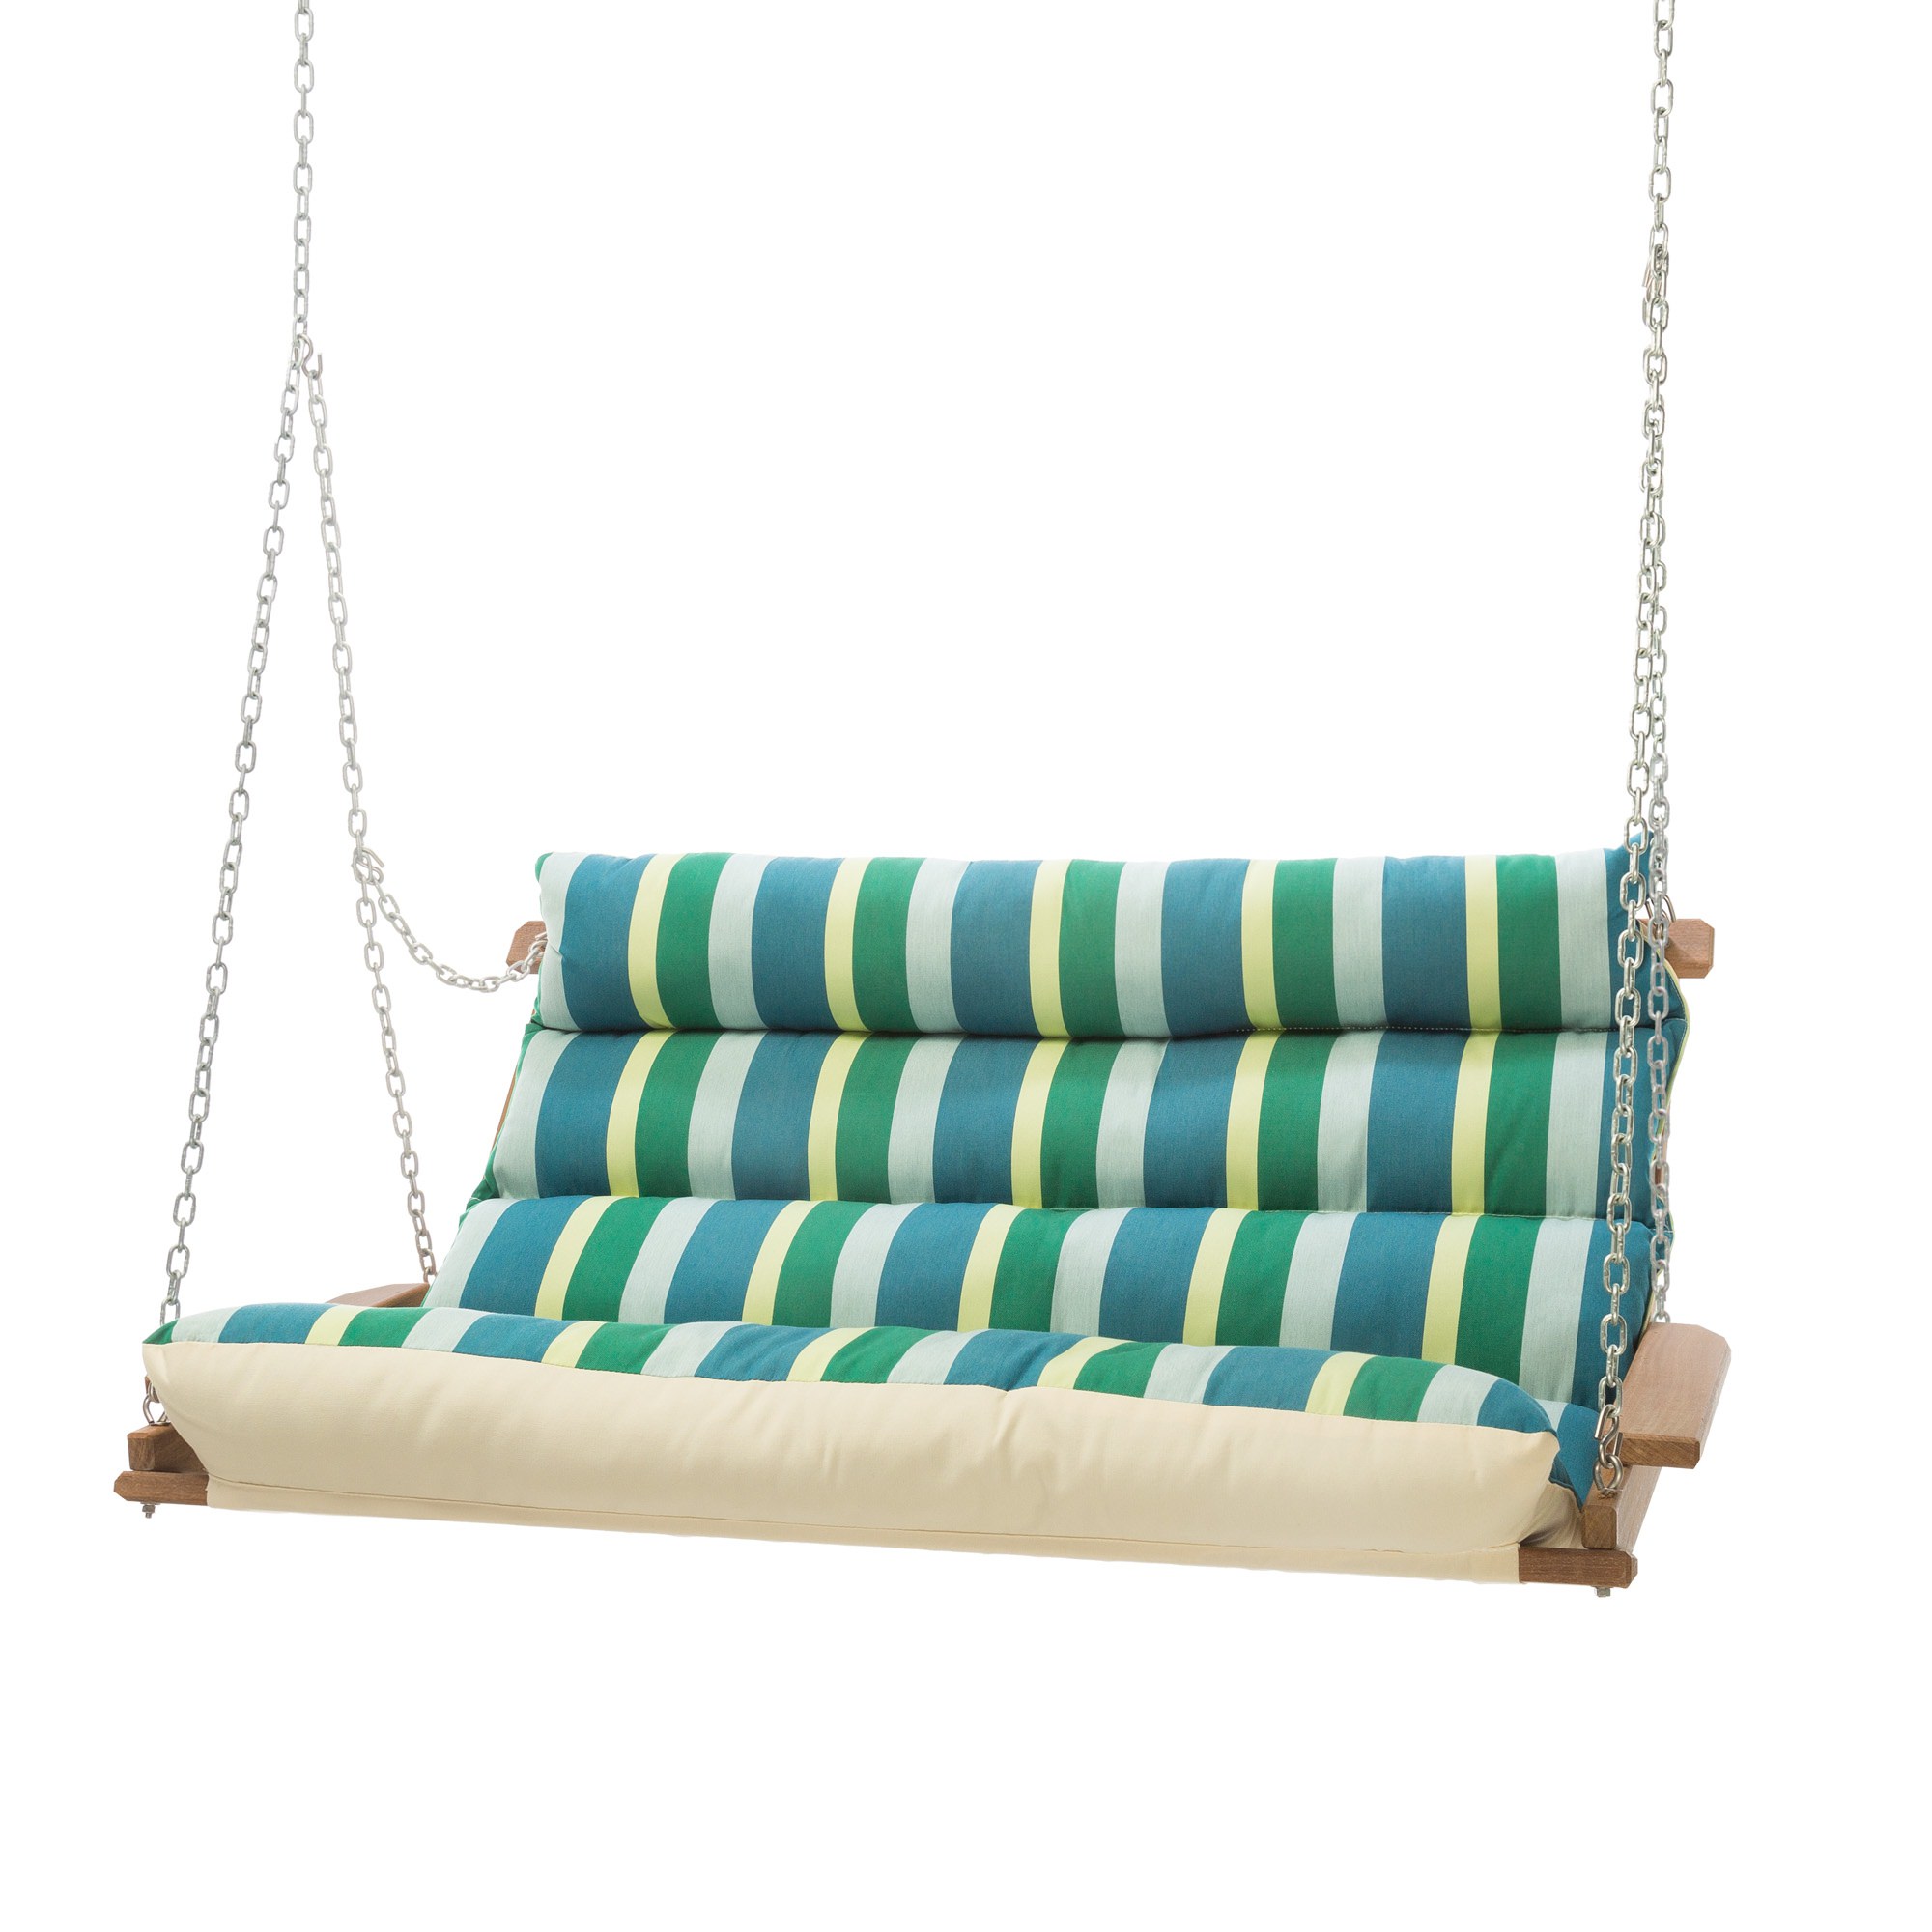 48 Inch Replacement Cushion For 60, How To Replace Outdoor Swing Cushions